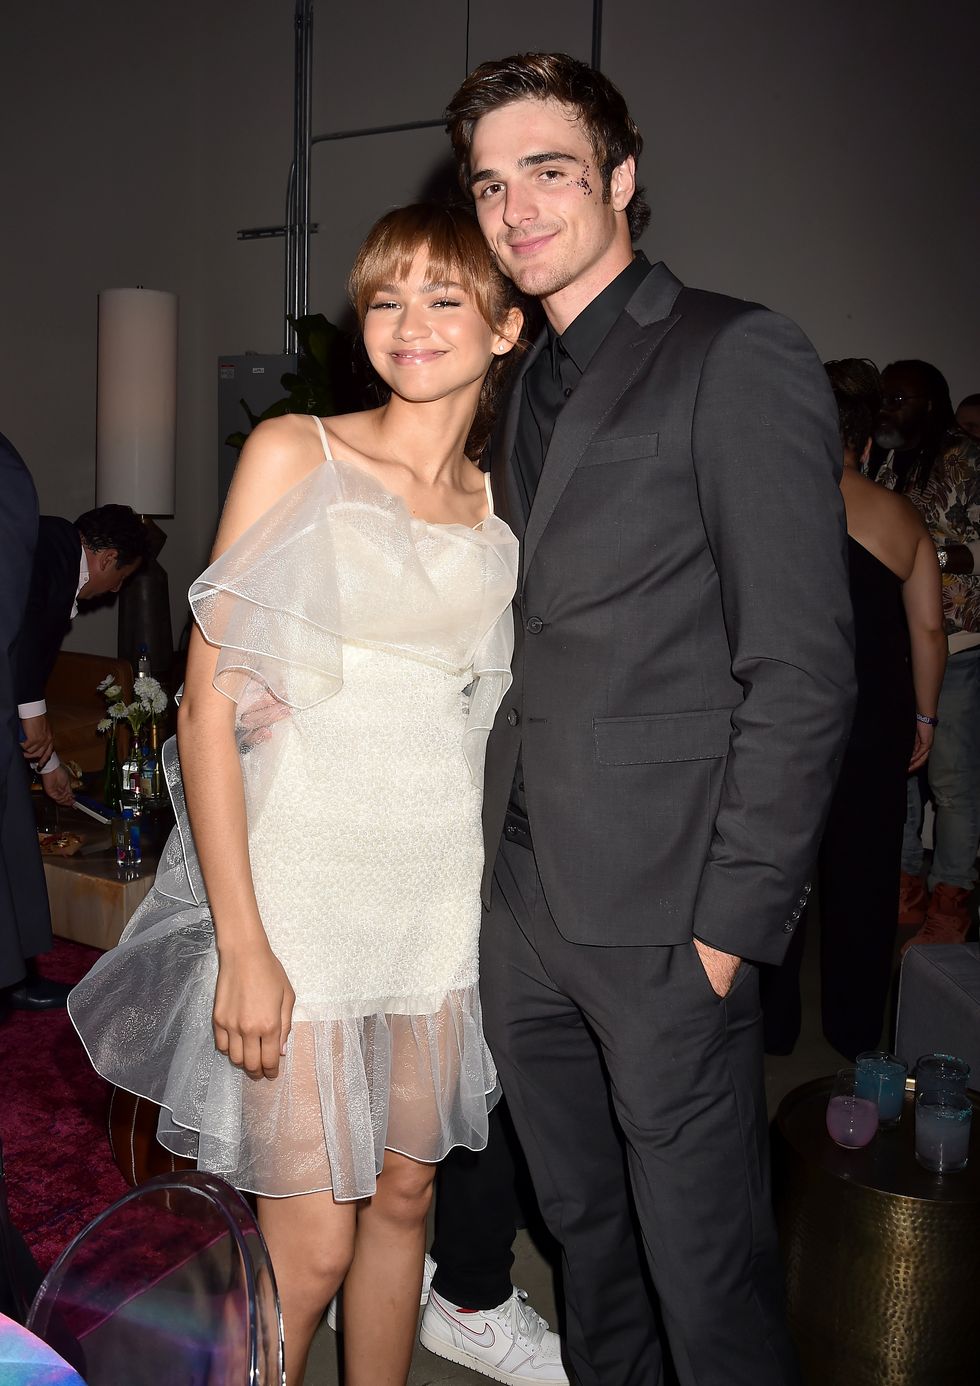 los angeles, california   june 04 zendaya and jacob elordi attend hbos euphoria premiere at the arclight pacific theatres cinerama dome on june 04, 2019 in los angeles, california photo by filmmagicfilmmagic